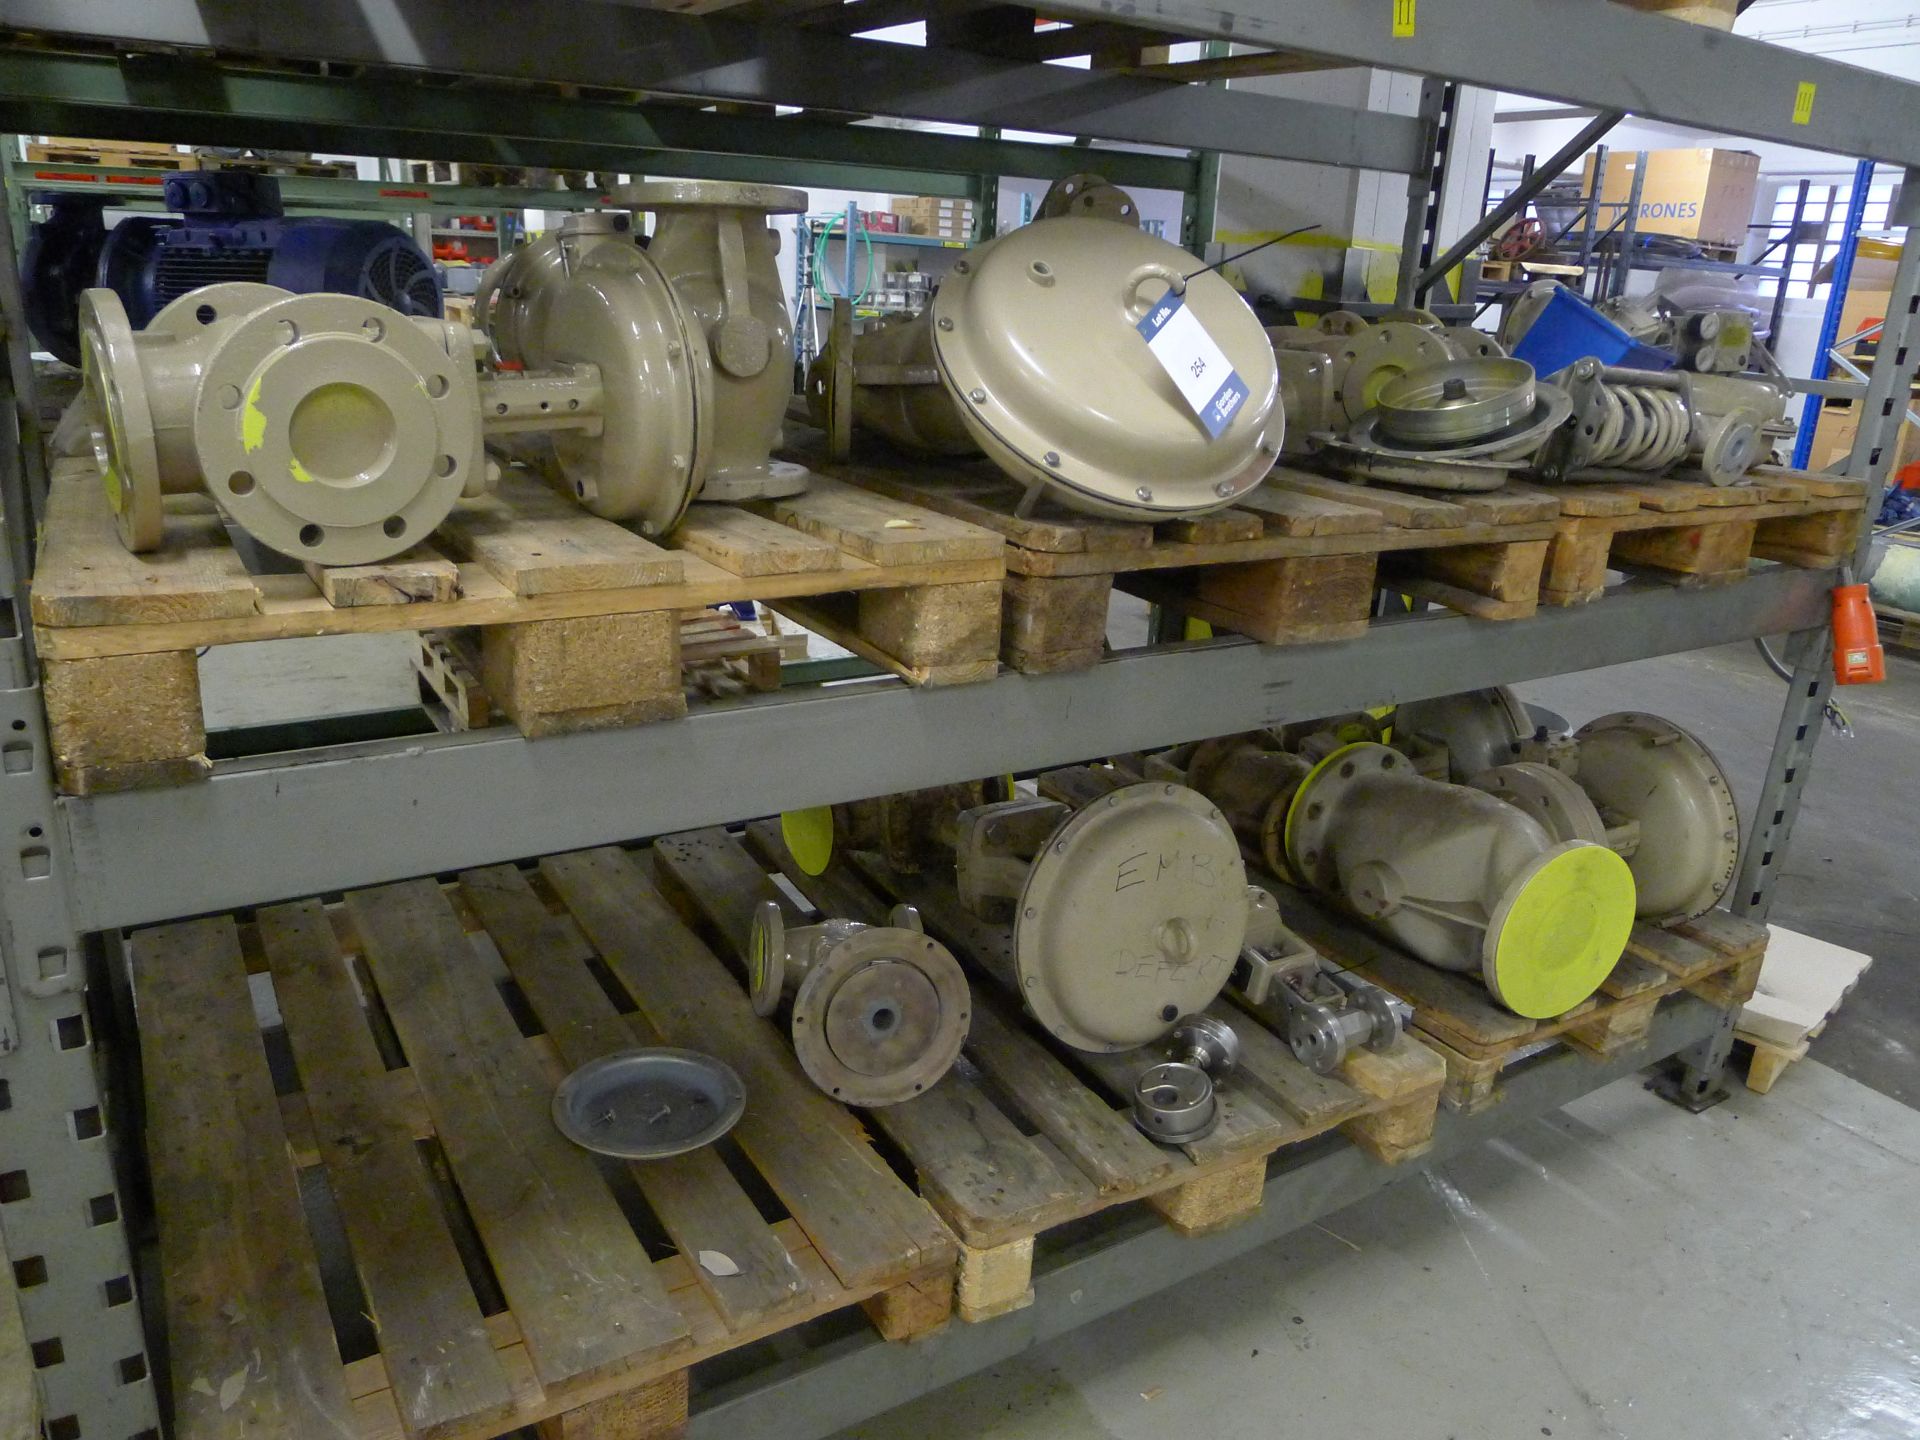 Contents to 2 Shelves of bay 13 to Include Samson Valves/ Spring Valves (Dismantling and Loading